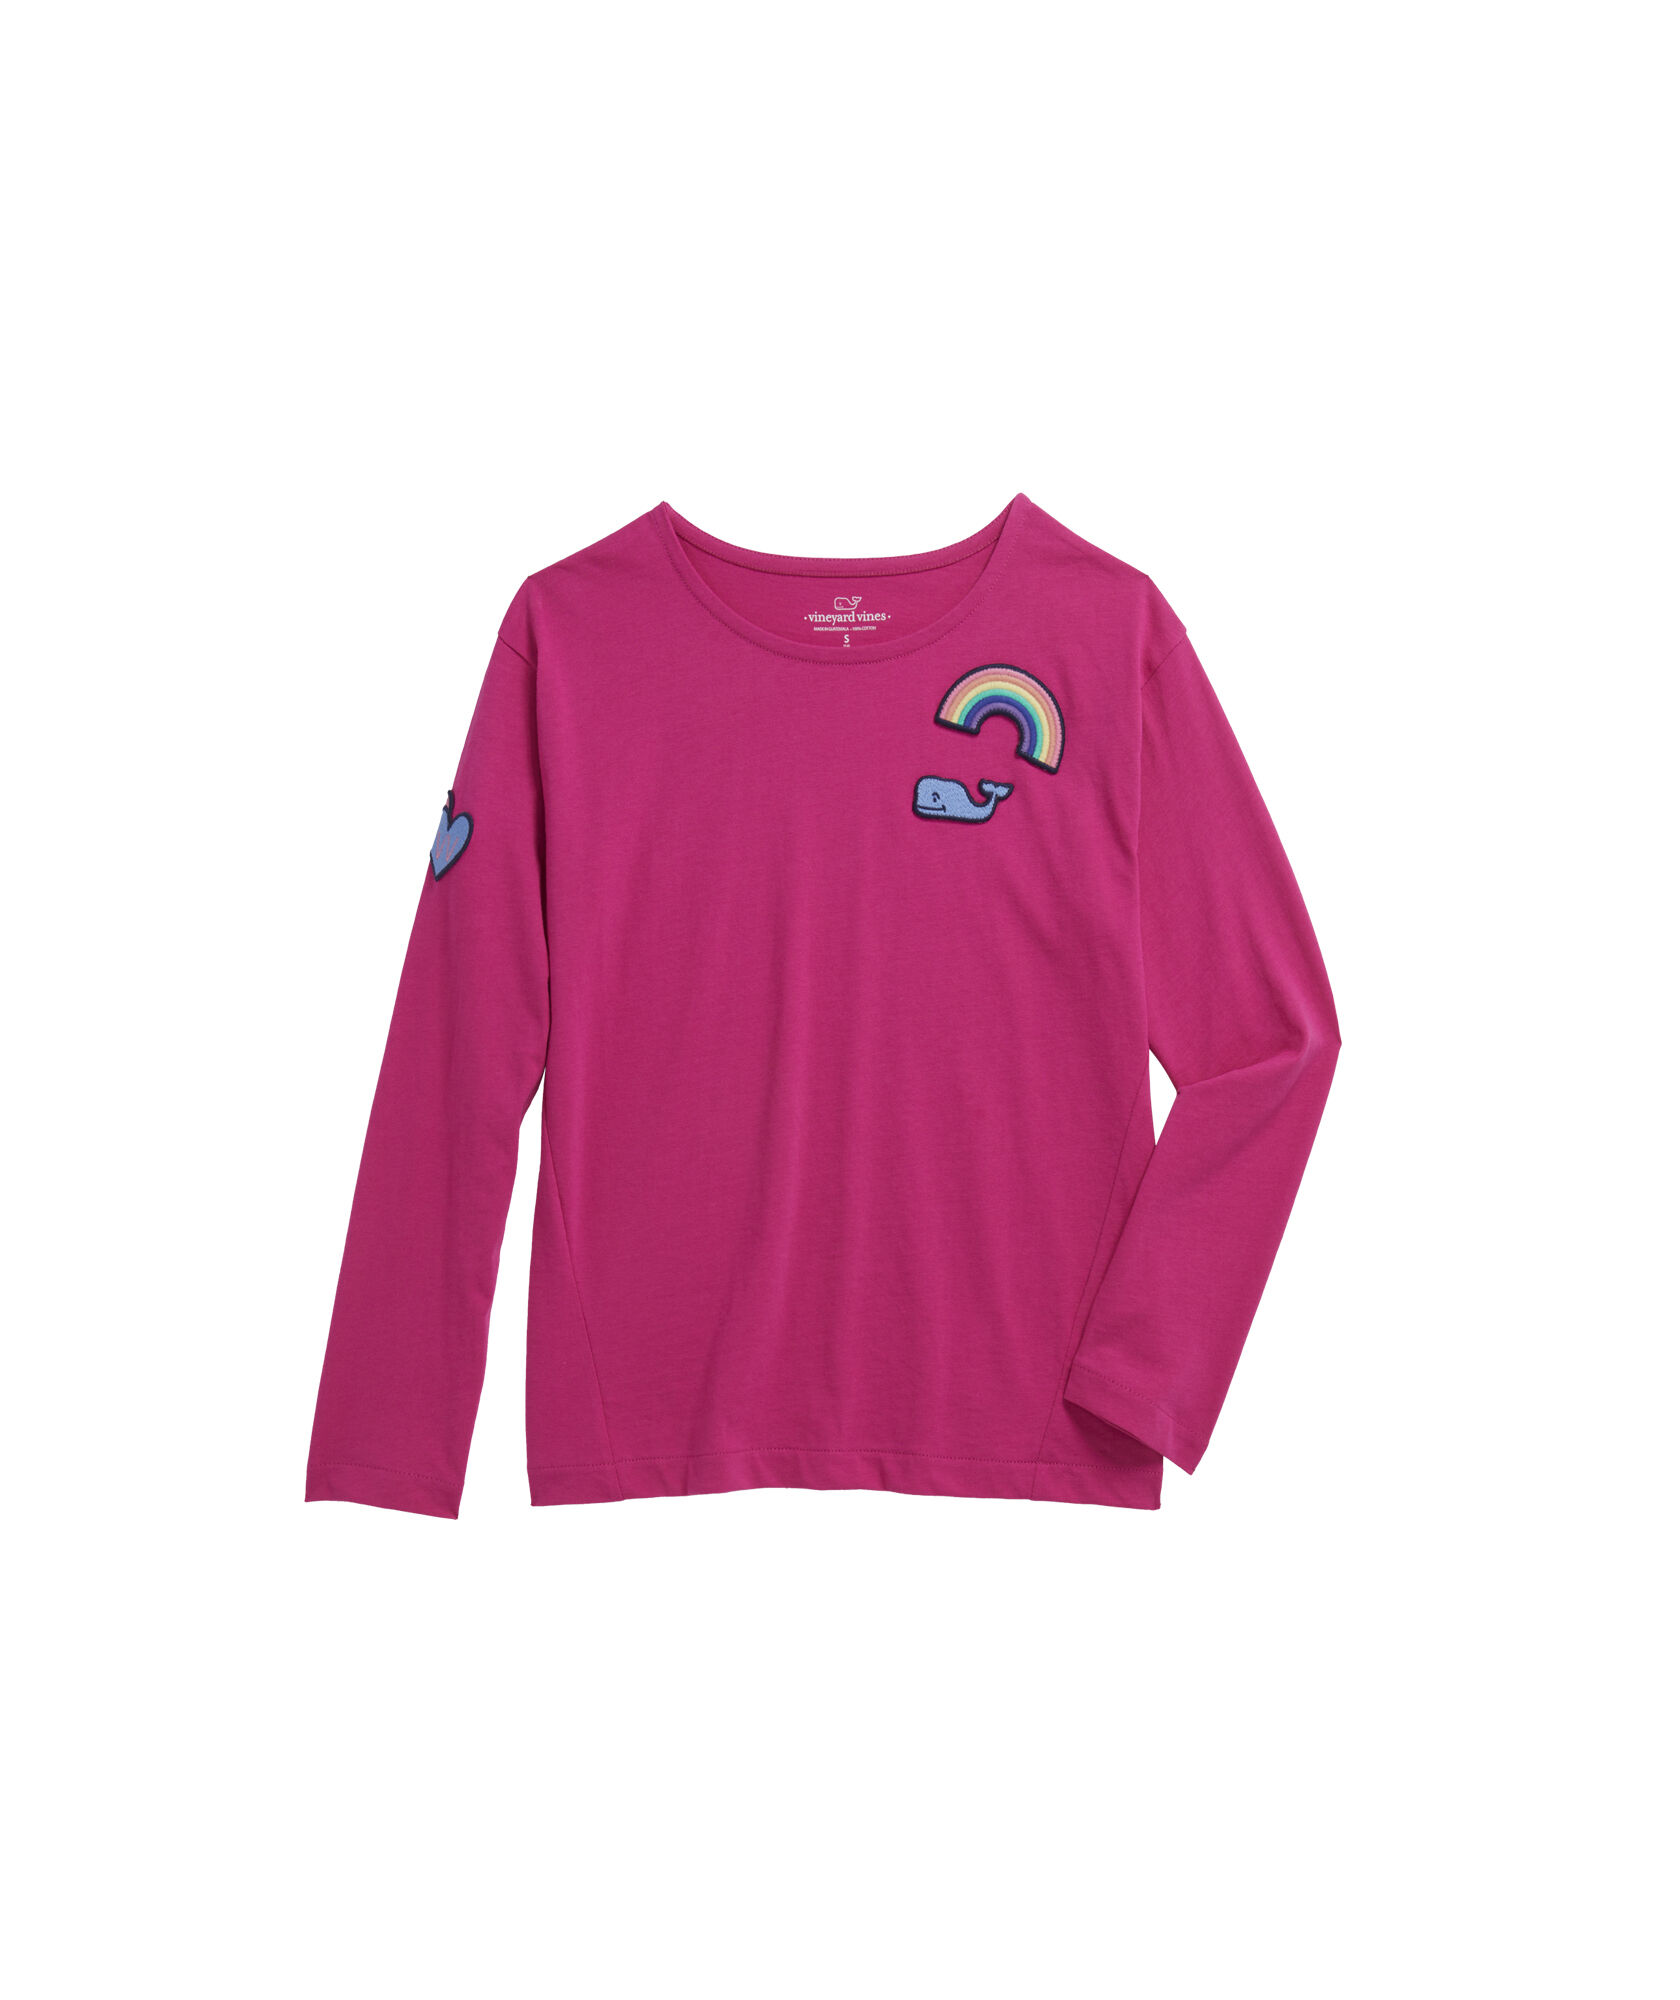 OUTLET Girls' vineyard vines Patch Knit Top